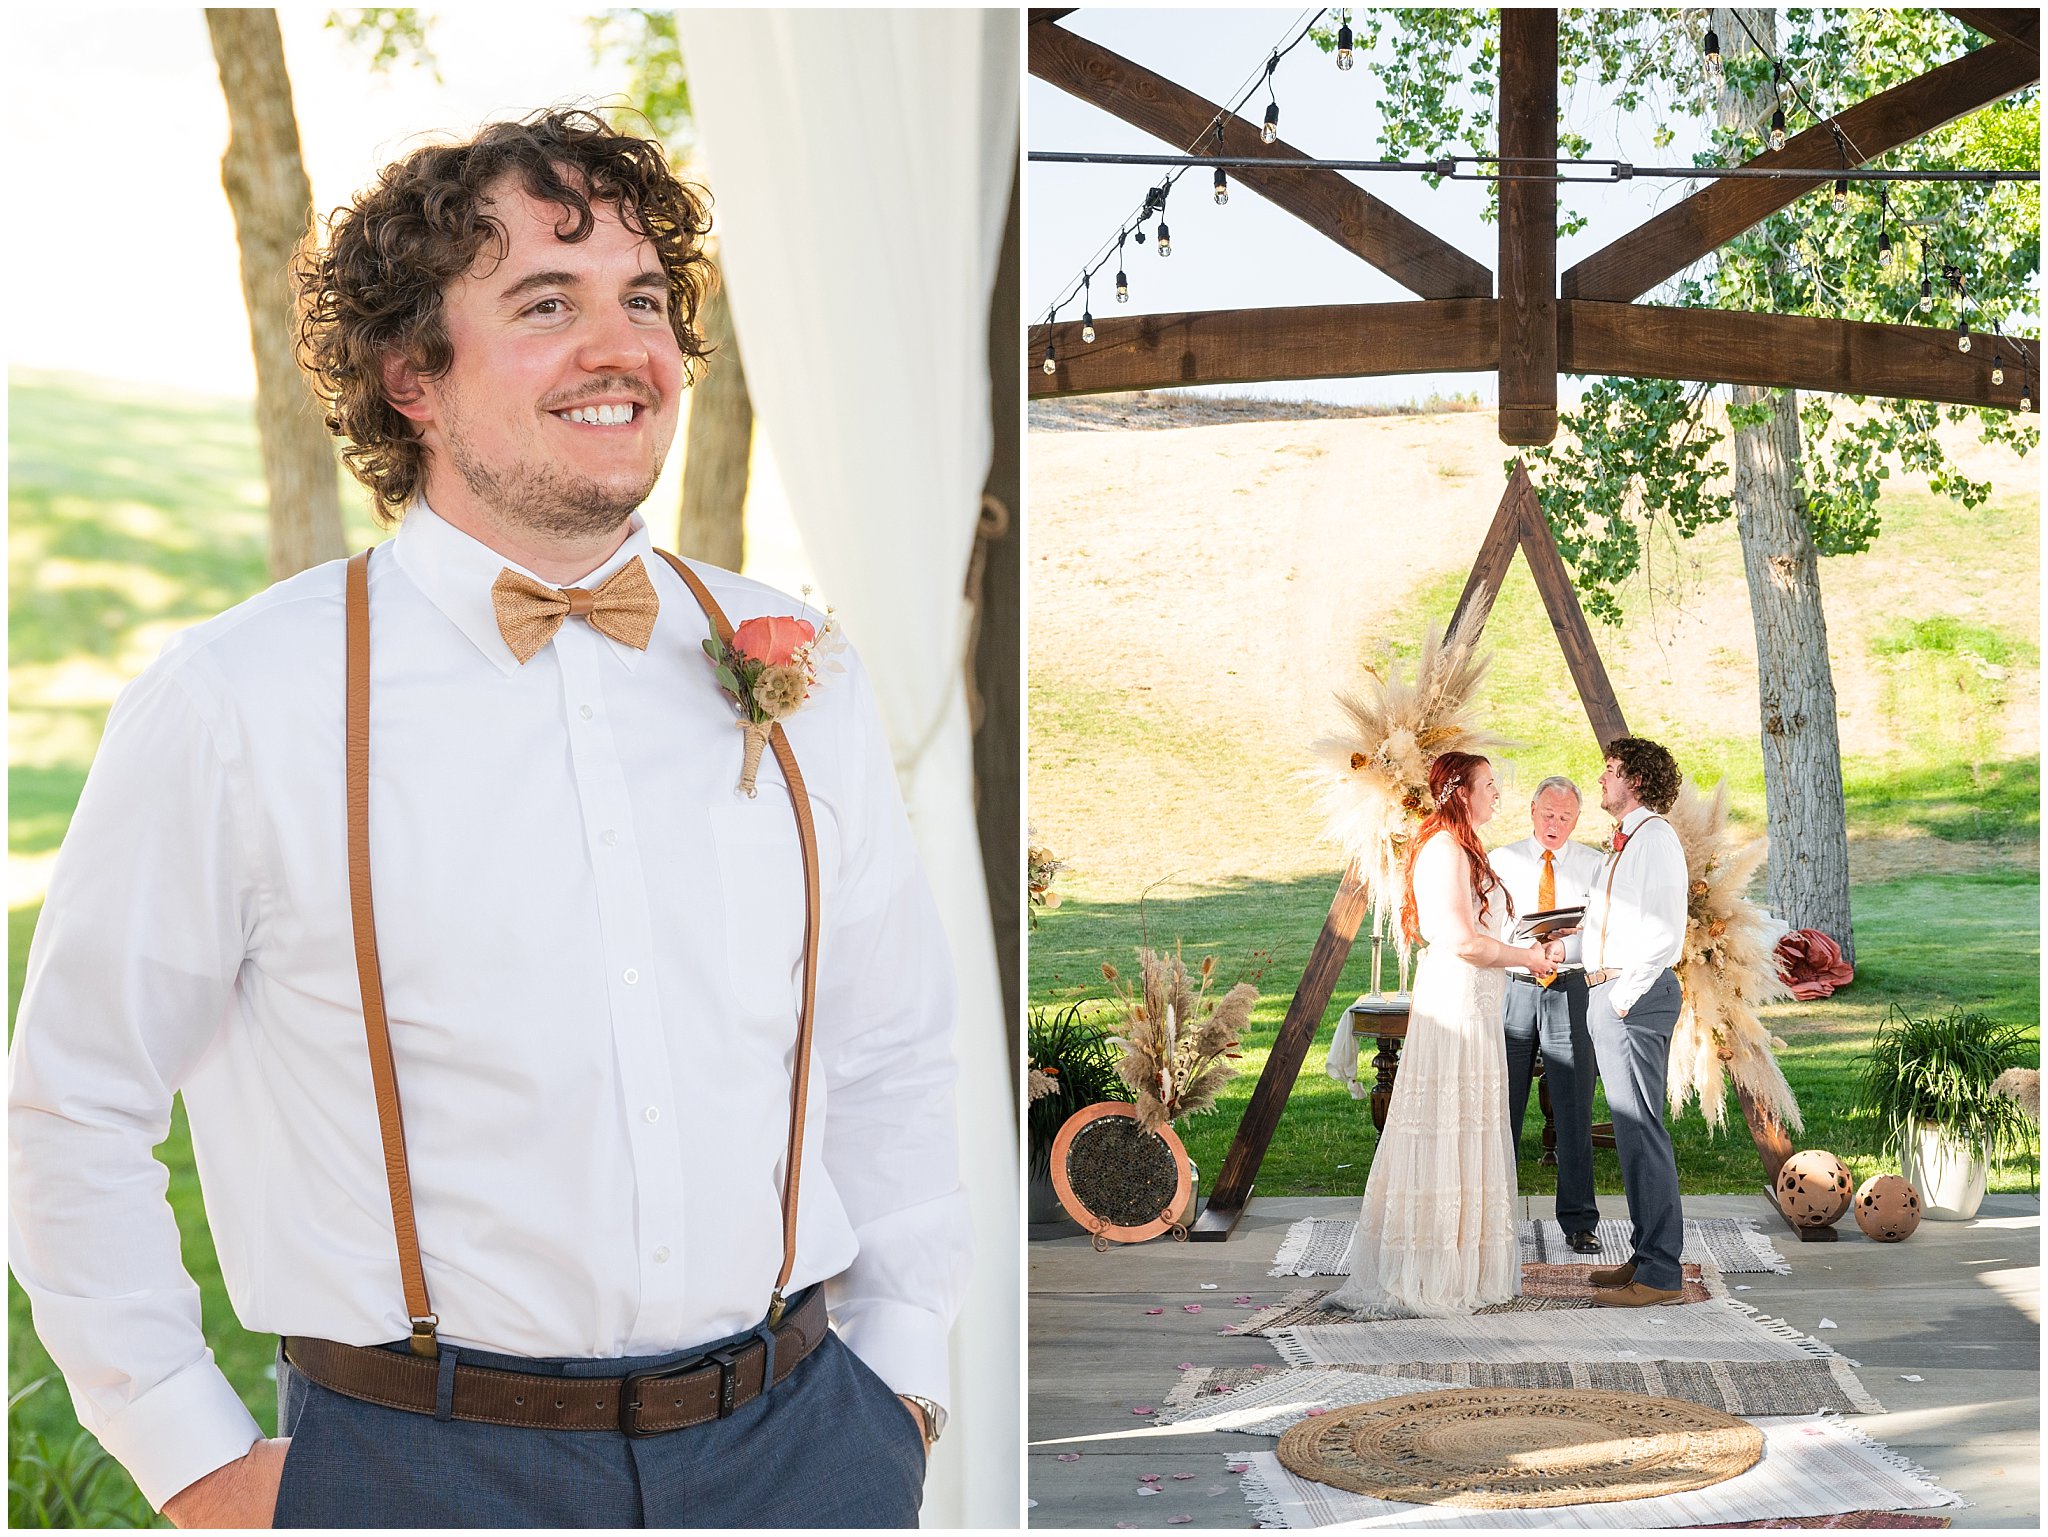 Wedding ceremony with boho decor at Lions Park in Cache Valley | Logan Utah Outdoor Summer Wedding | Jessie and Dallin Photography